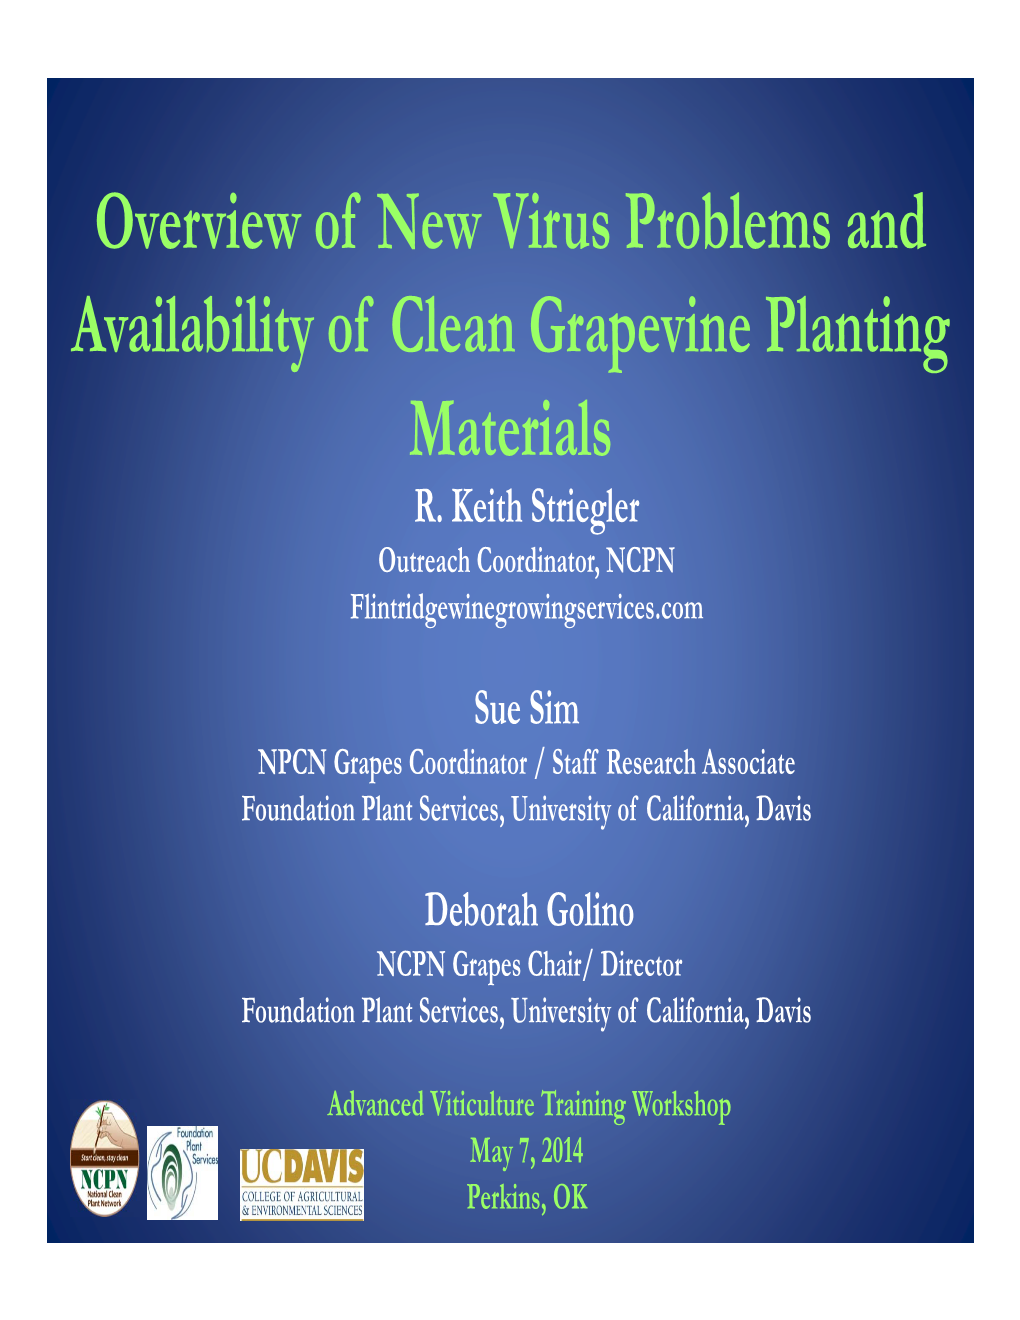 Overview of New Virus Problems and Availability of Clean Grapevine Planting Materials R